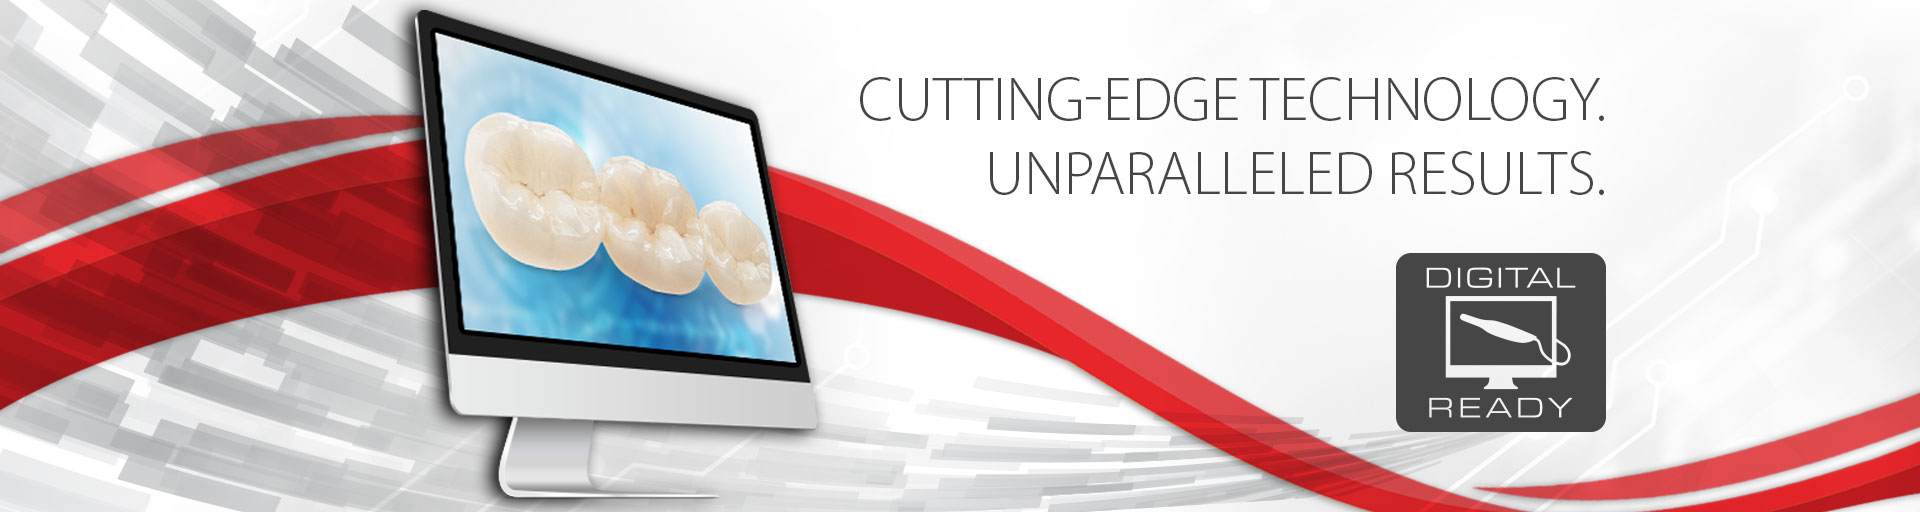 Cutting-Edge Technology. Unparalleled results.